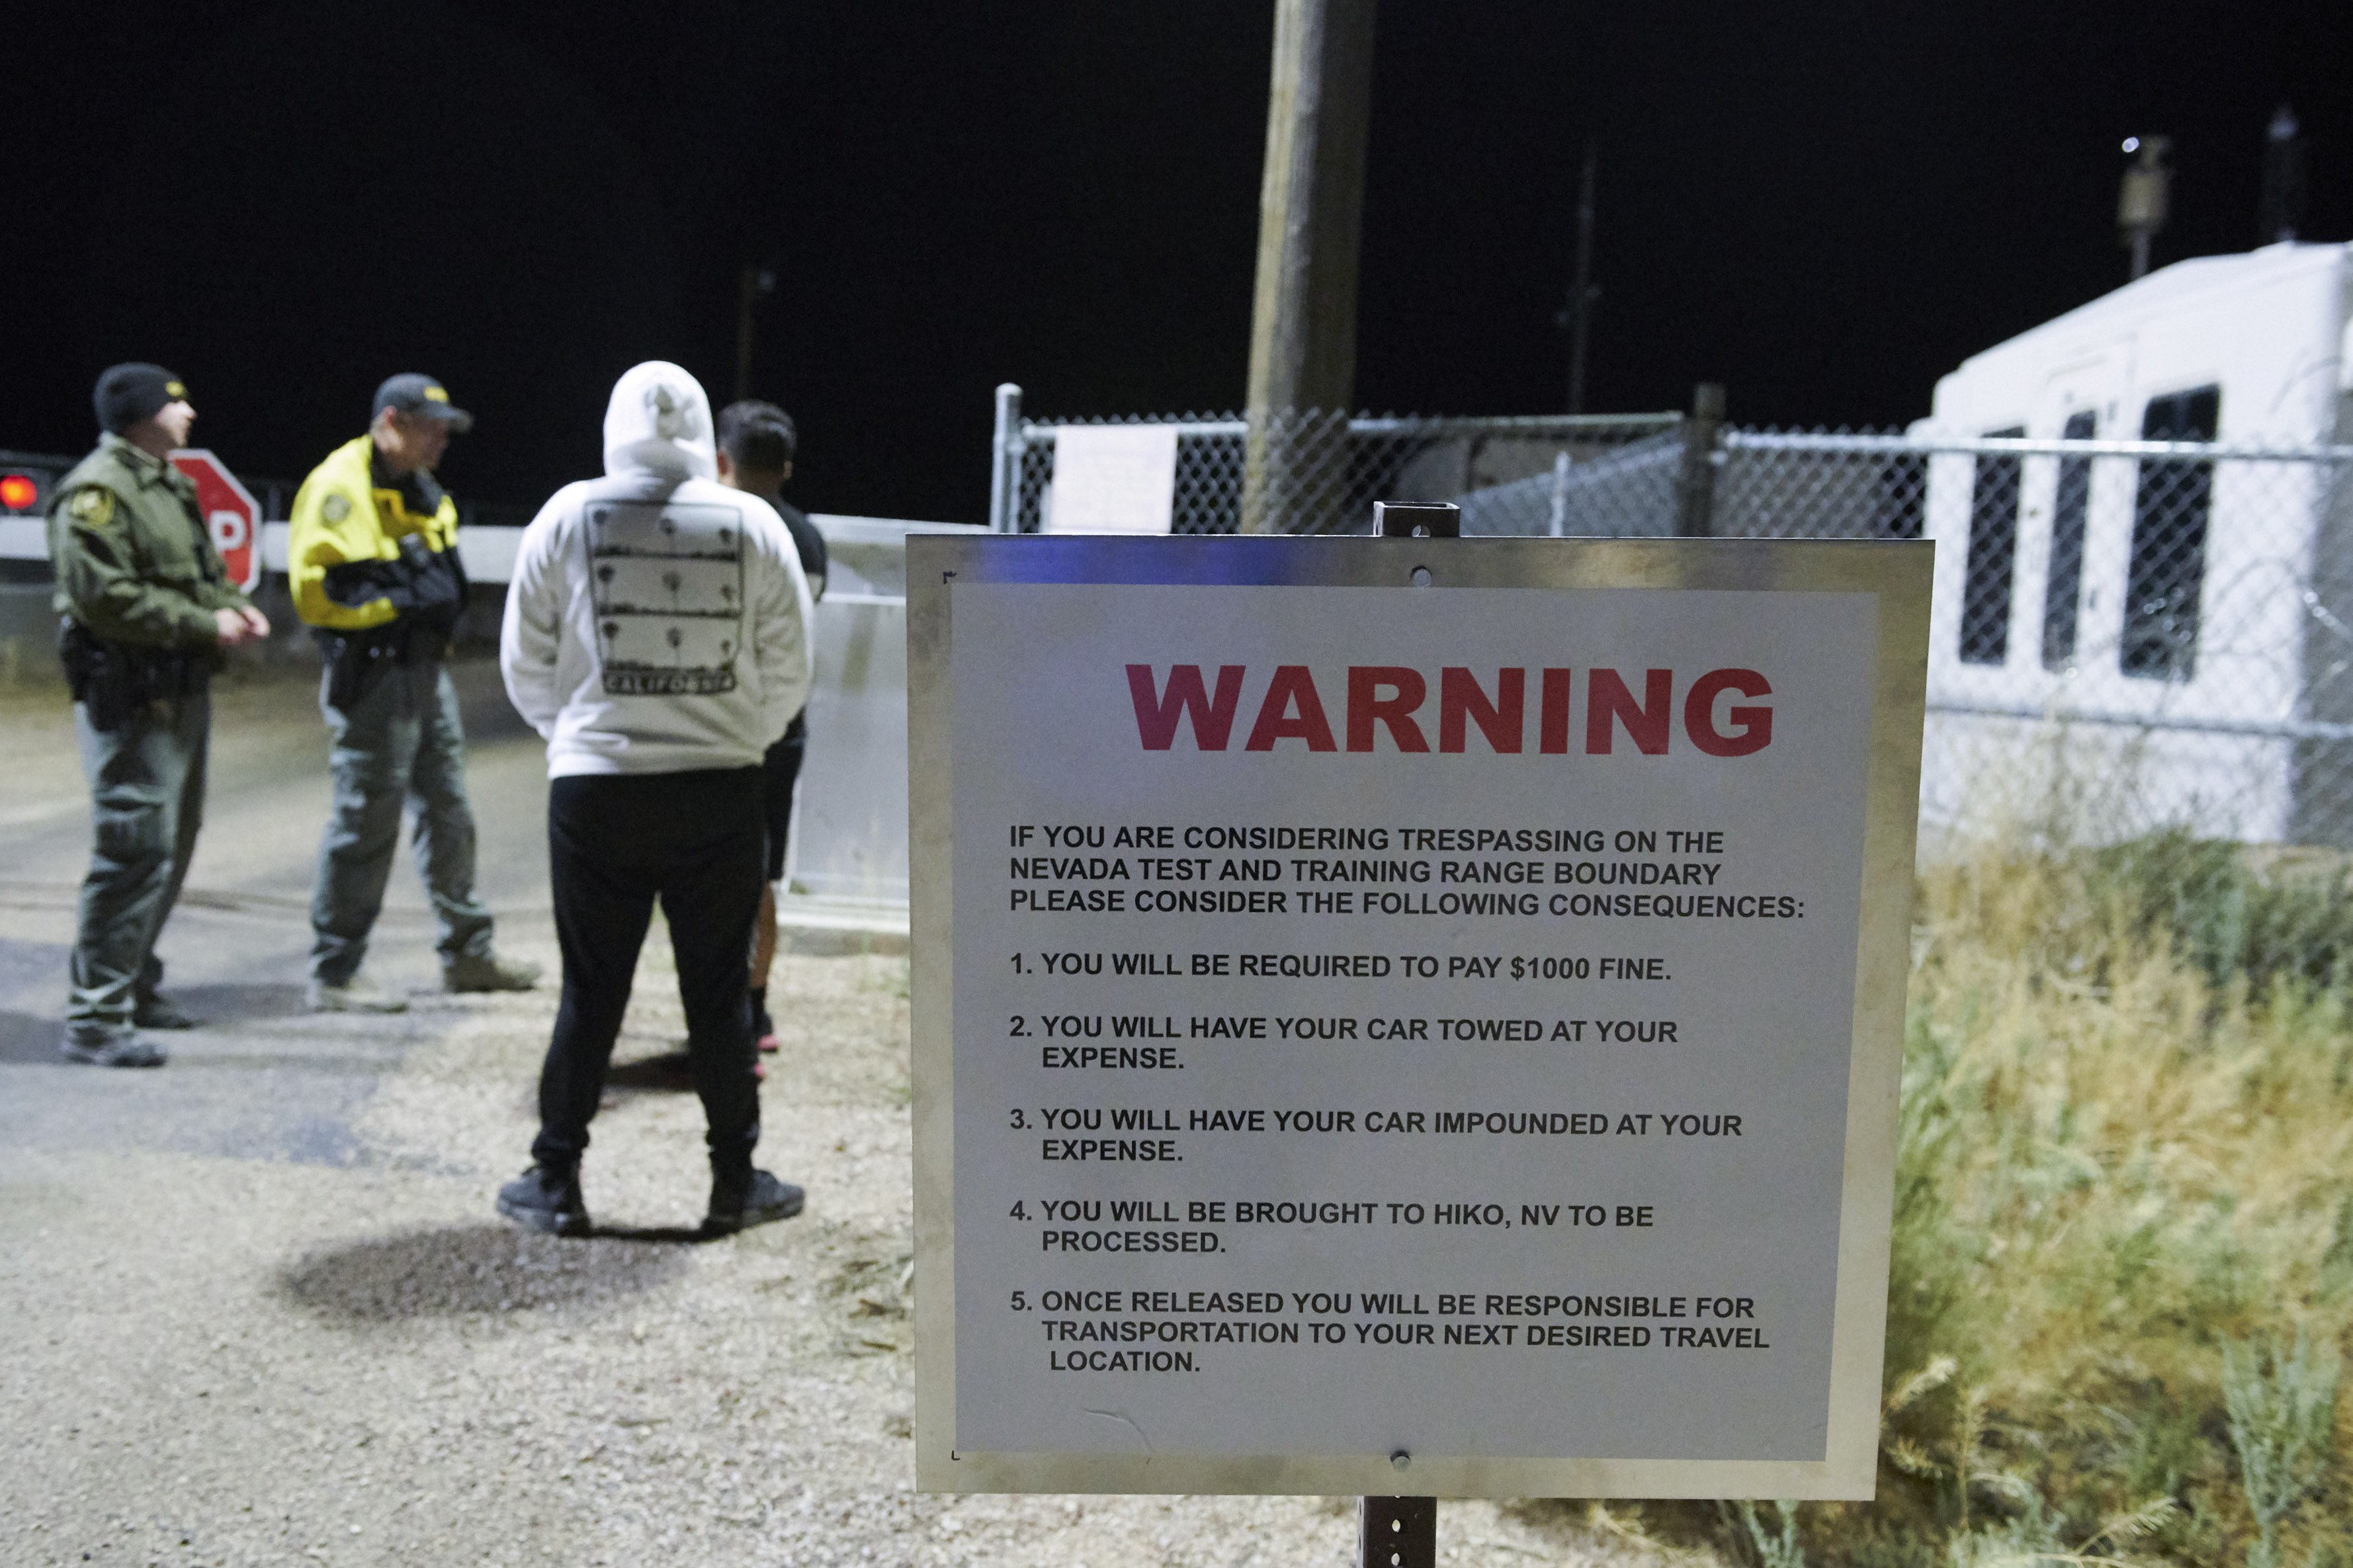 Attendees discuss with guards as they gather to "storm" Area 51 at an entrance to the military facility near Rachel, Nevada on September 20, 2019. (Photo by BRIDGET BENNETT/AFP/Getty Images)